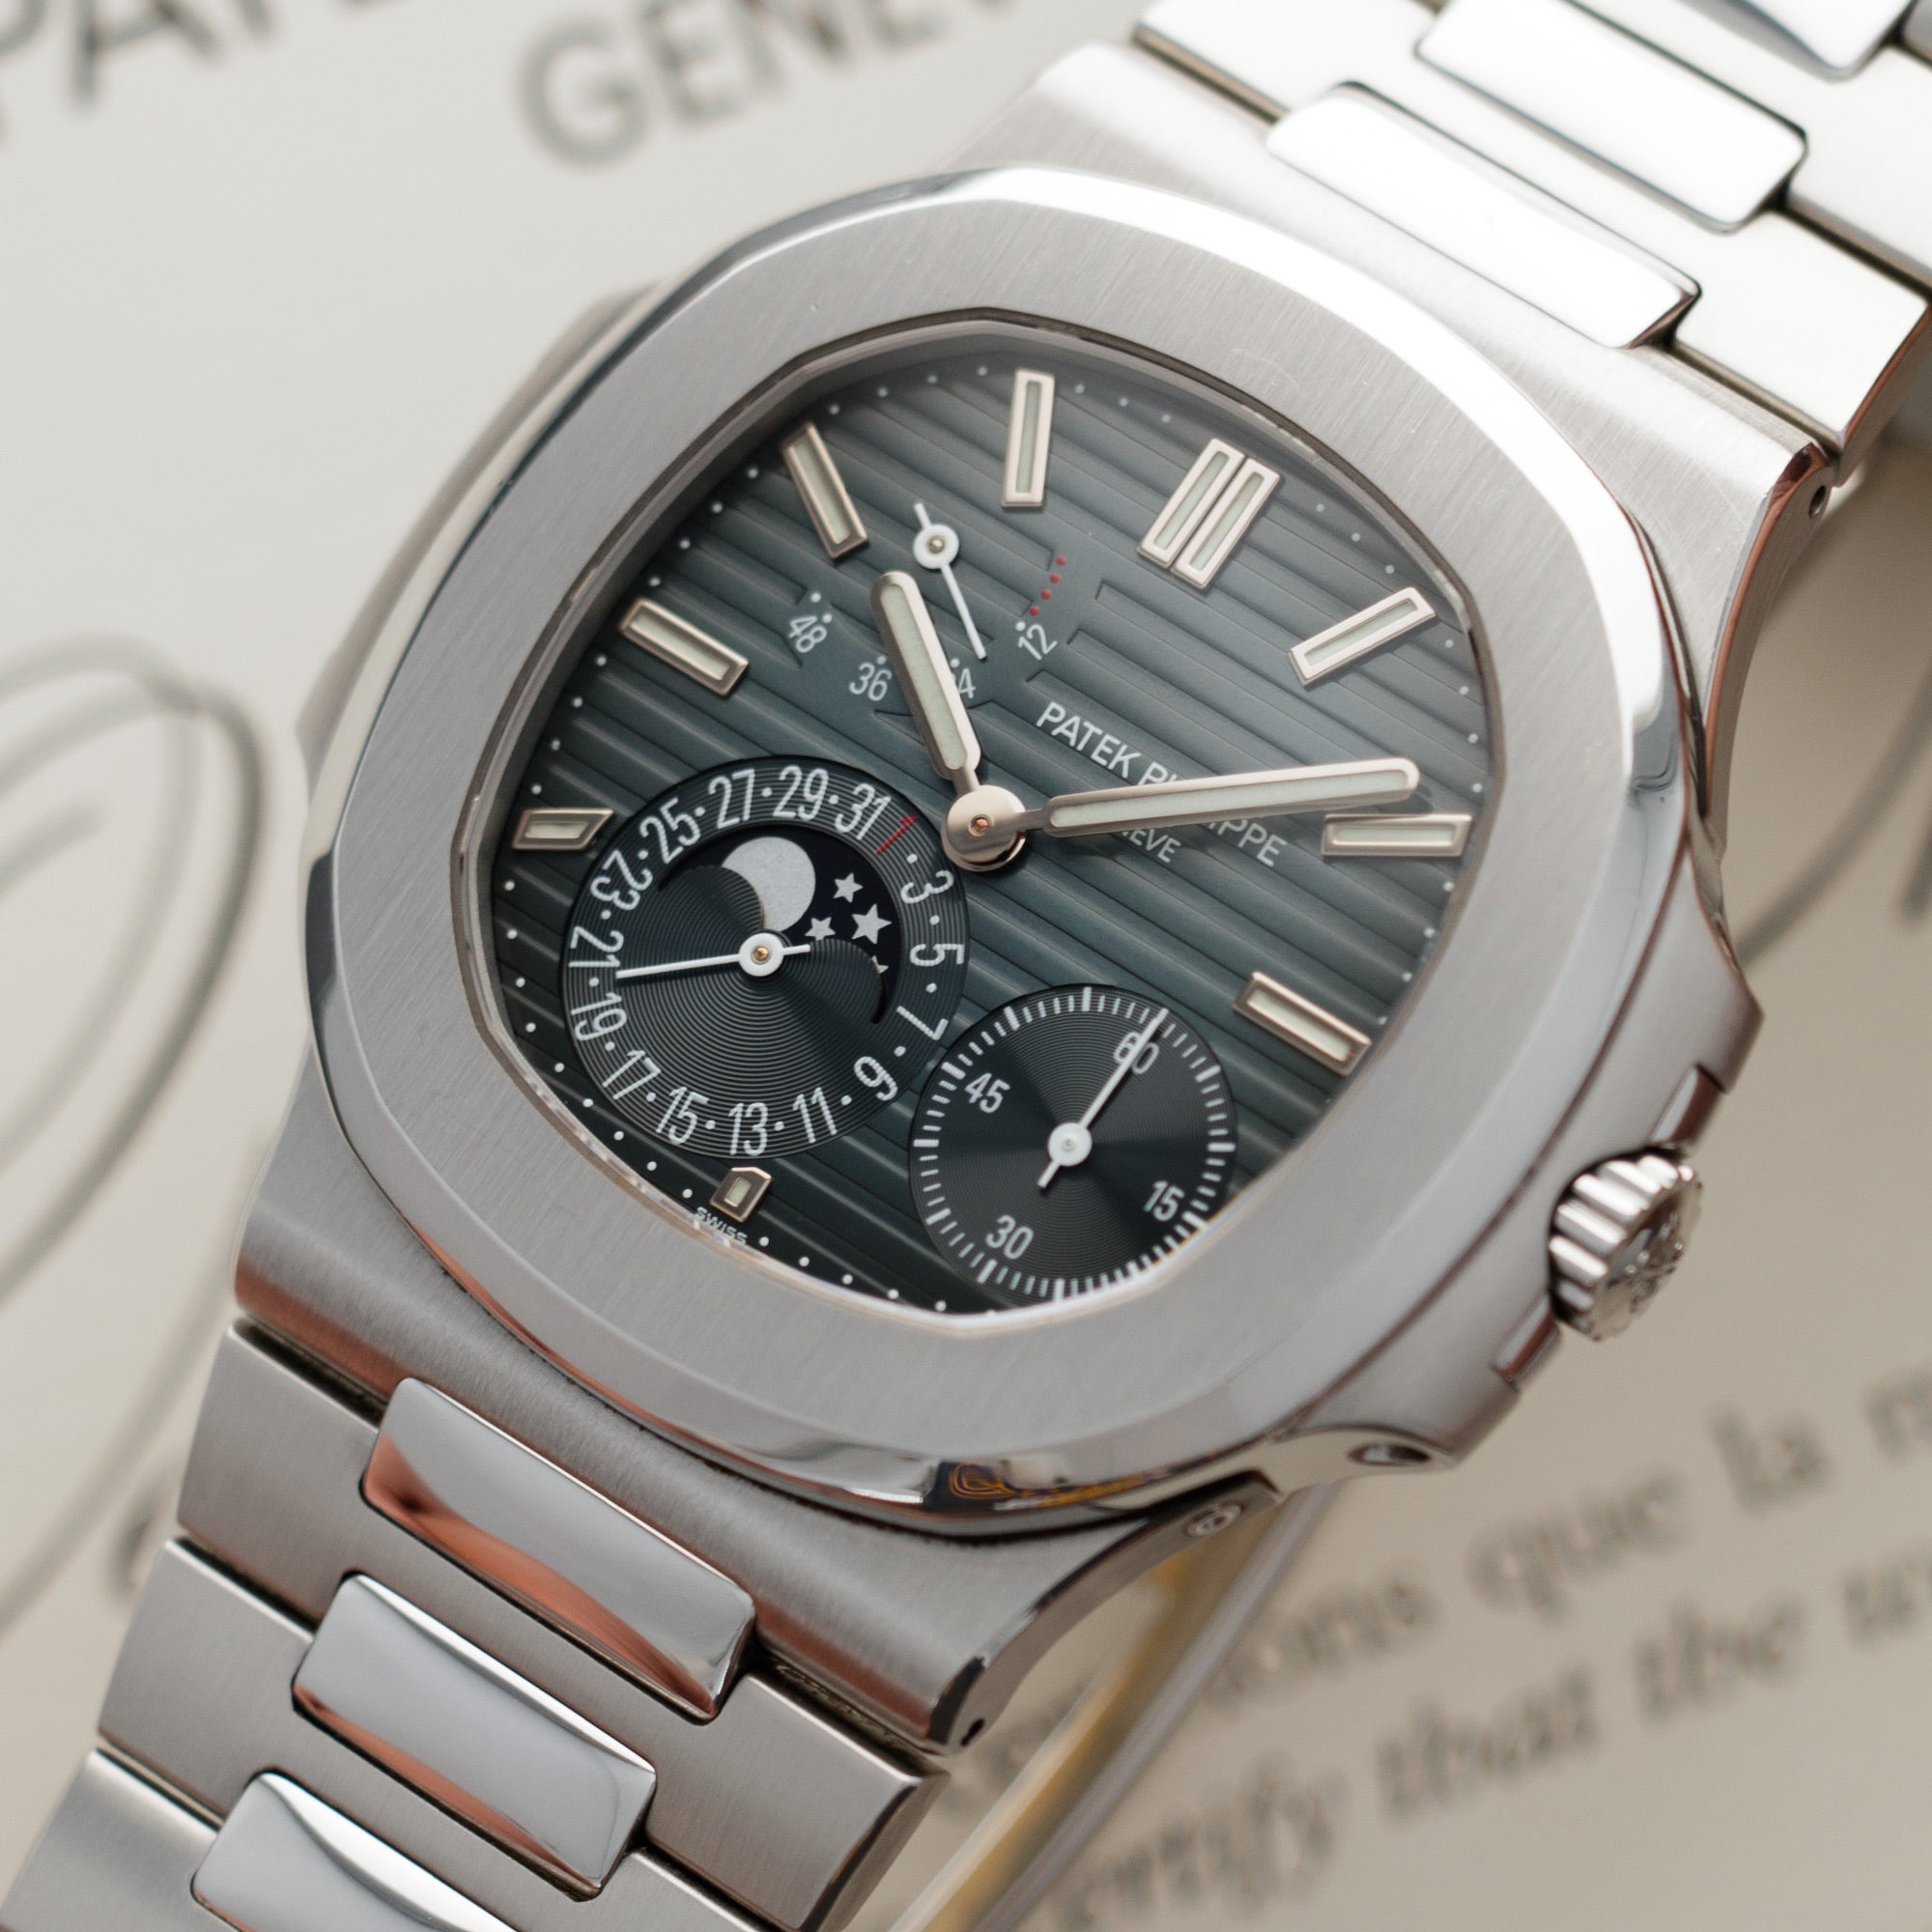 Patek Philippe - Patek Philippe Nautilus Moonphase Watch Ref. 5712 with Original Box and Papers - The Keystone Watches